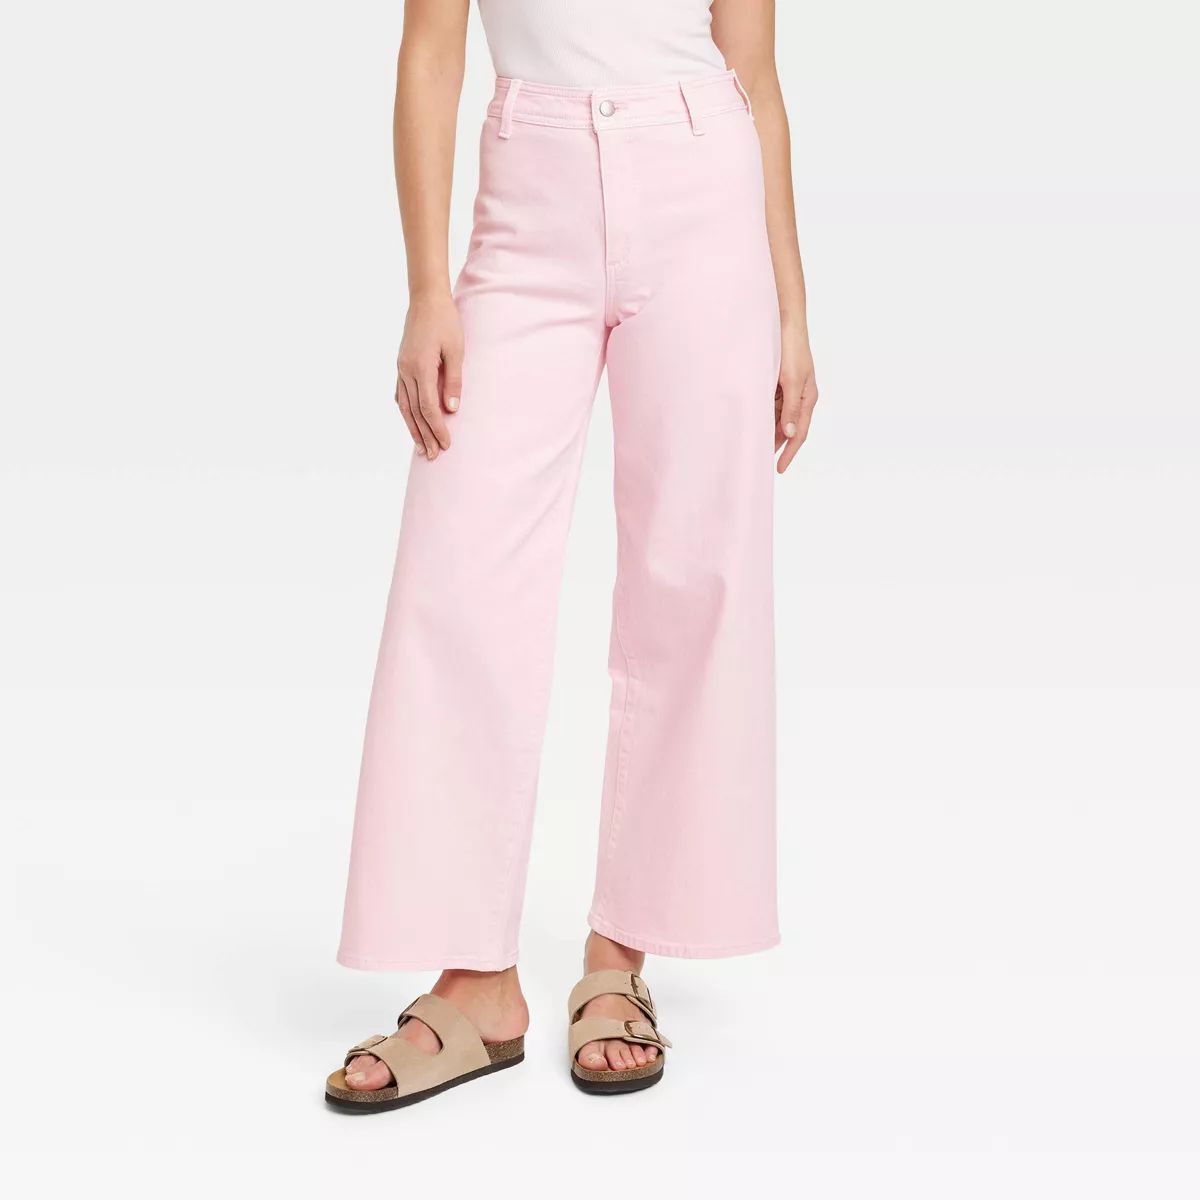 Women's High-Rise Sailor Wide Leg Ankle Jeans - Universal Thread™ Pink 8 | Target